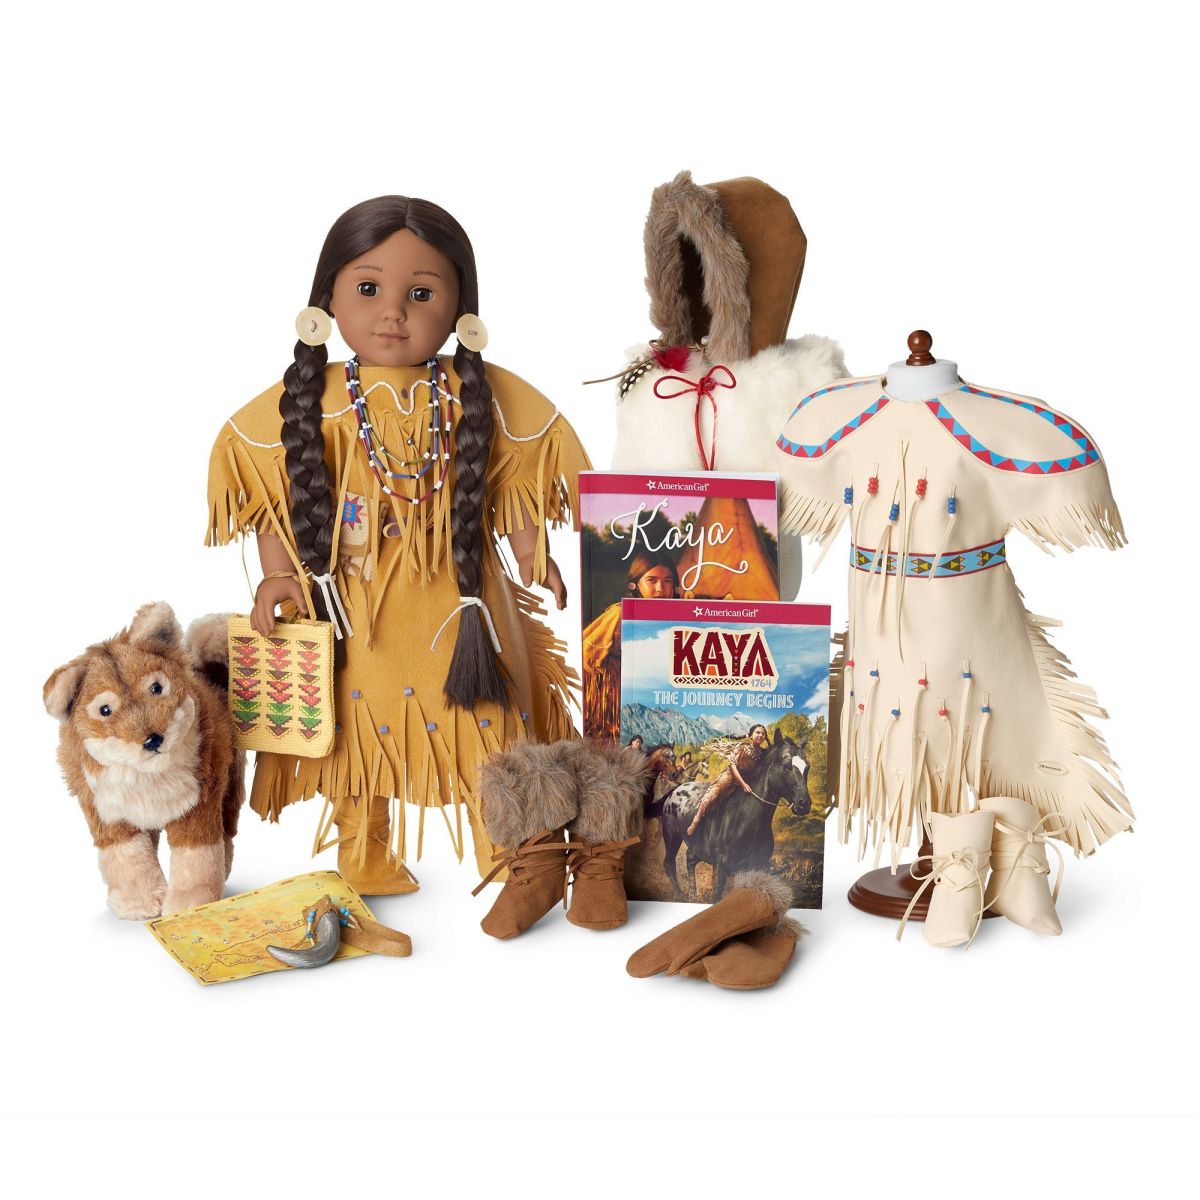 Kaya’s Clothing and Accessories (An American Girl Collector’s Guide)